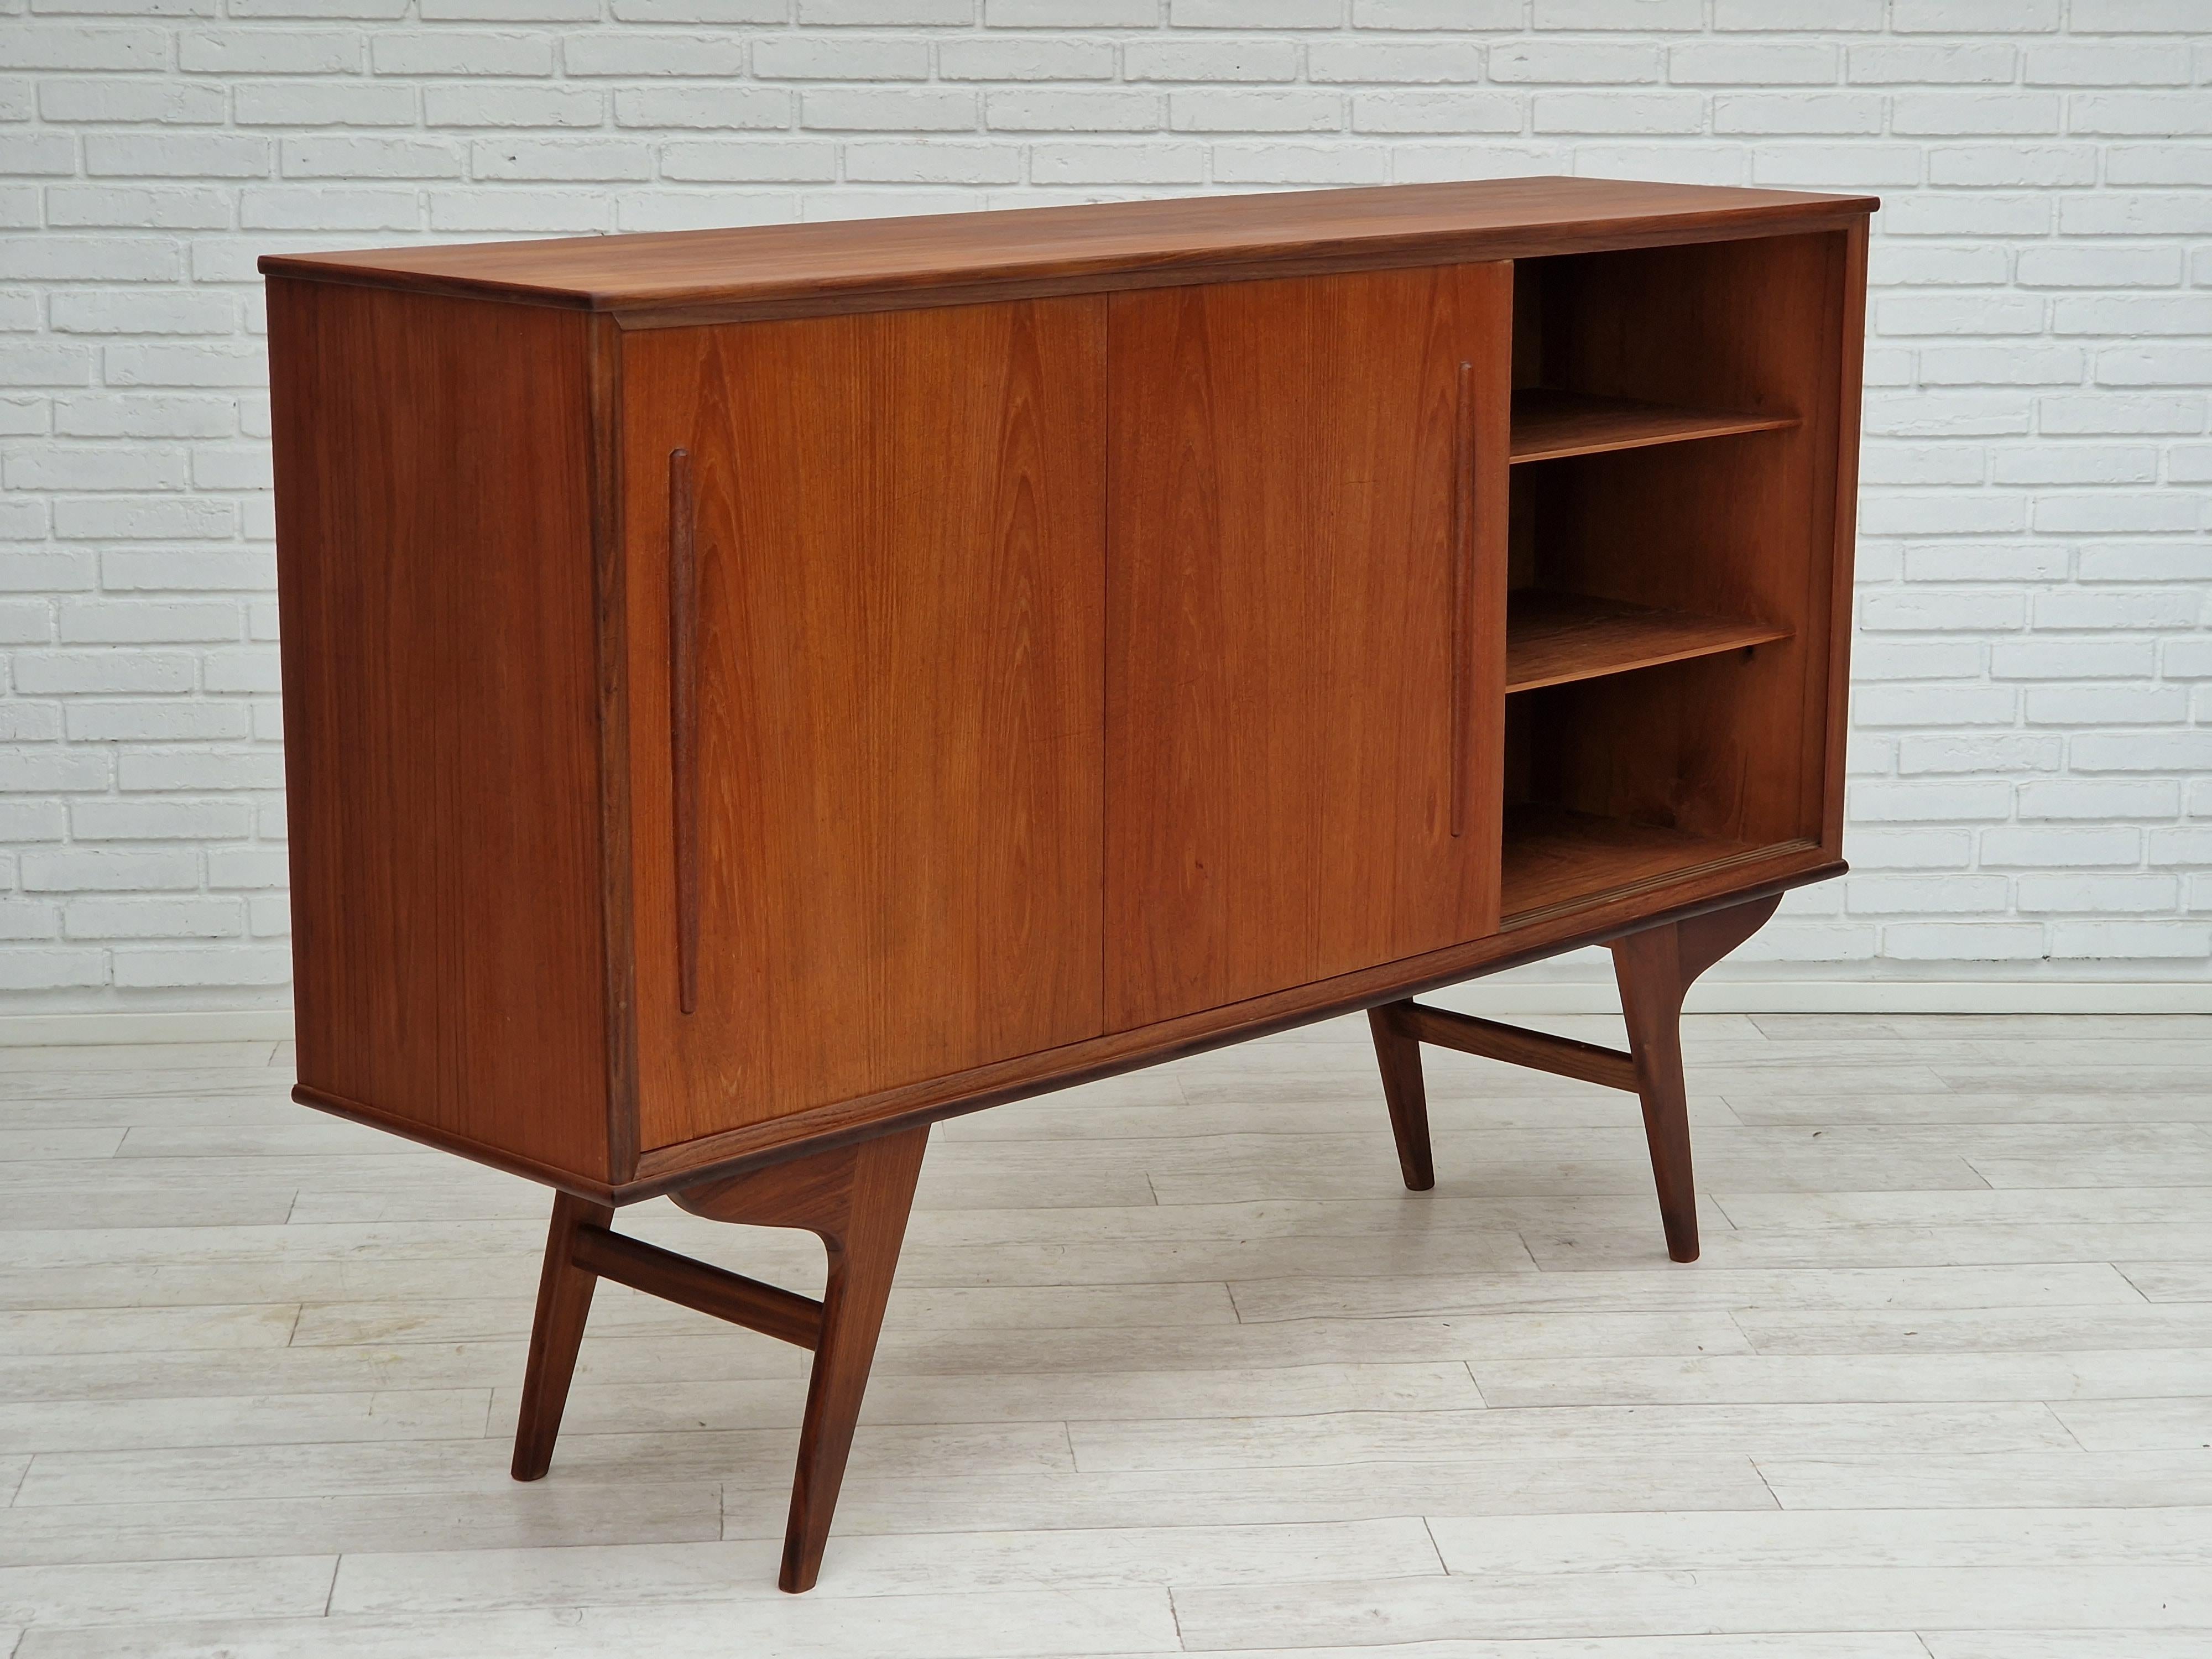 1960s, Vintage Danish Cabinet-Chest, Teak Wood In Good Condition For Sale In Tarm, 82